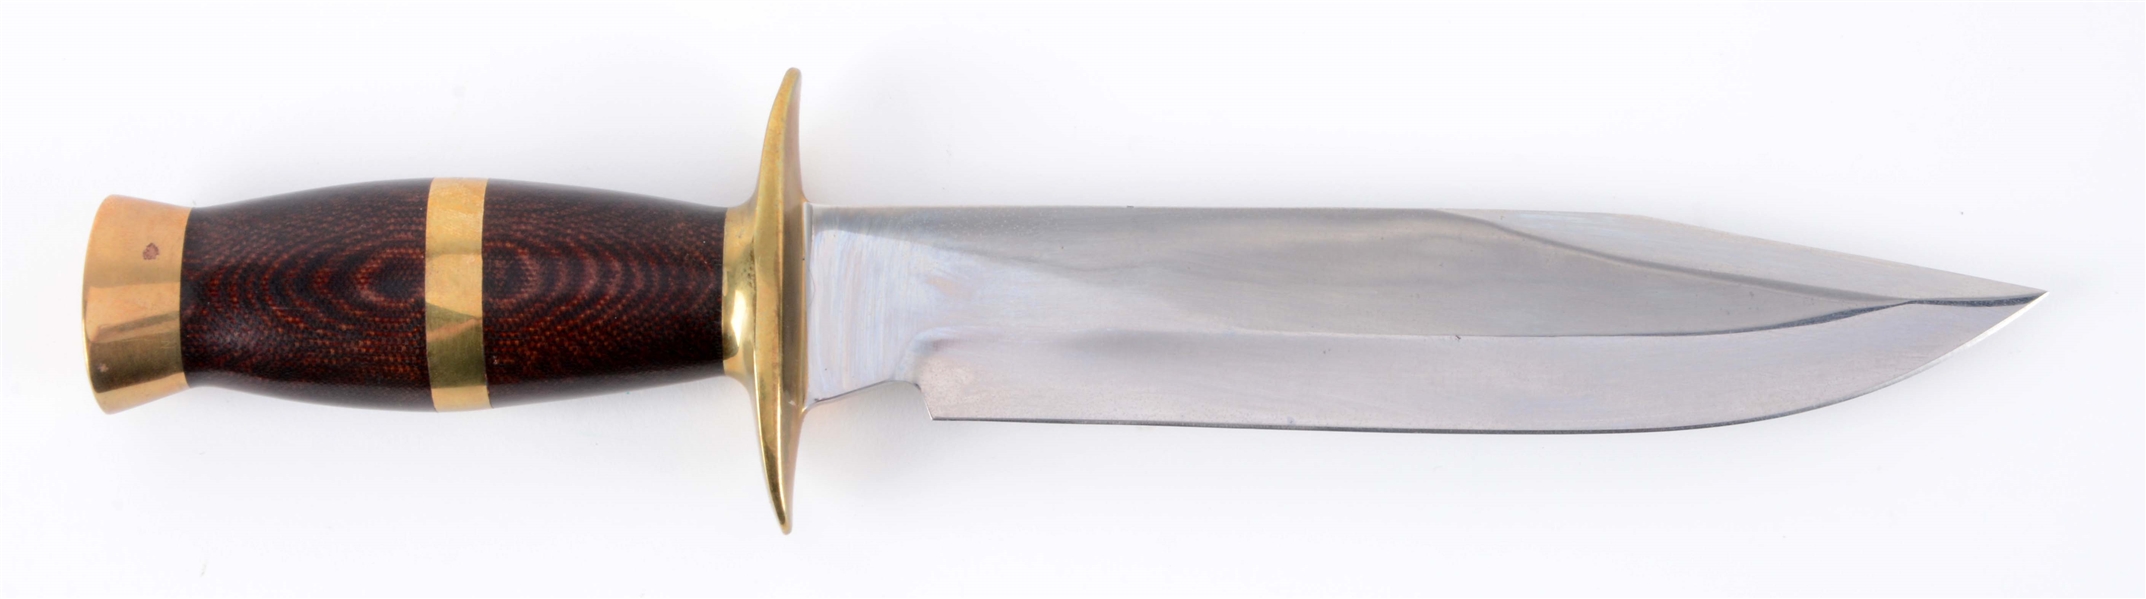 J.N. COOPER FIGHTING KNIFE WITH MICARTA AND BRASS HANDLE.